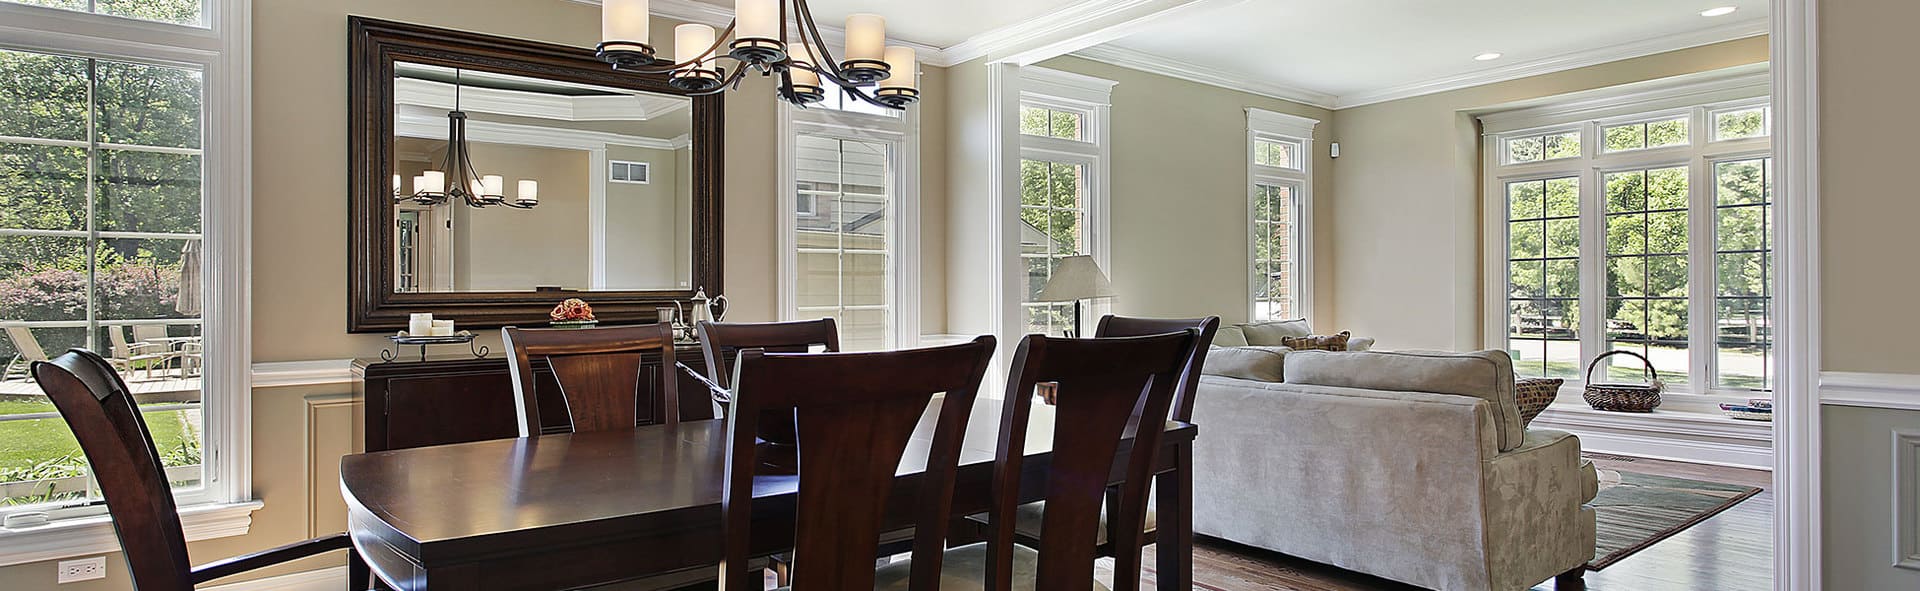 open dining room table